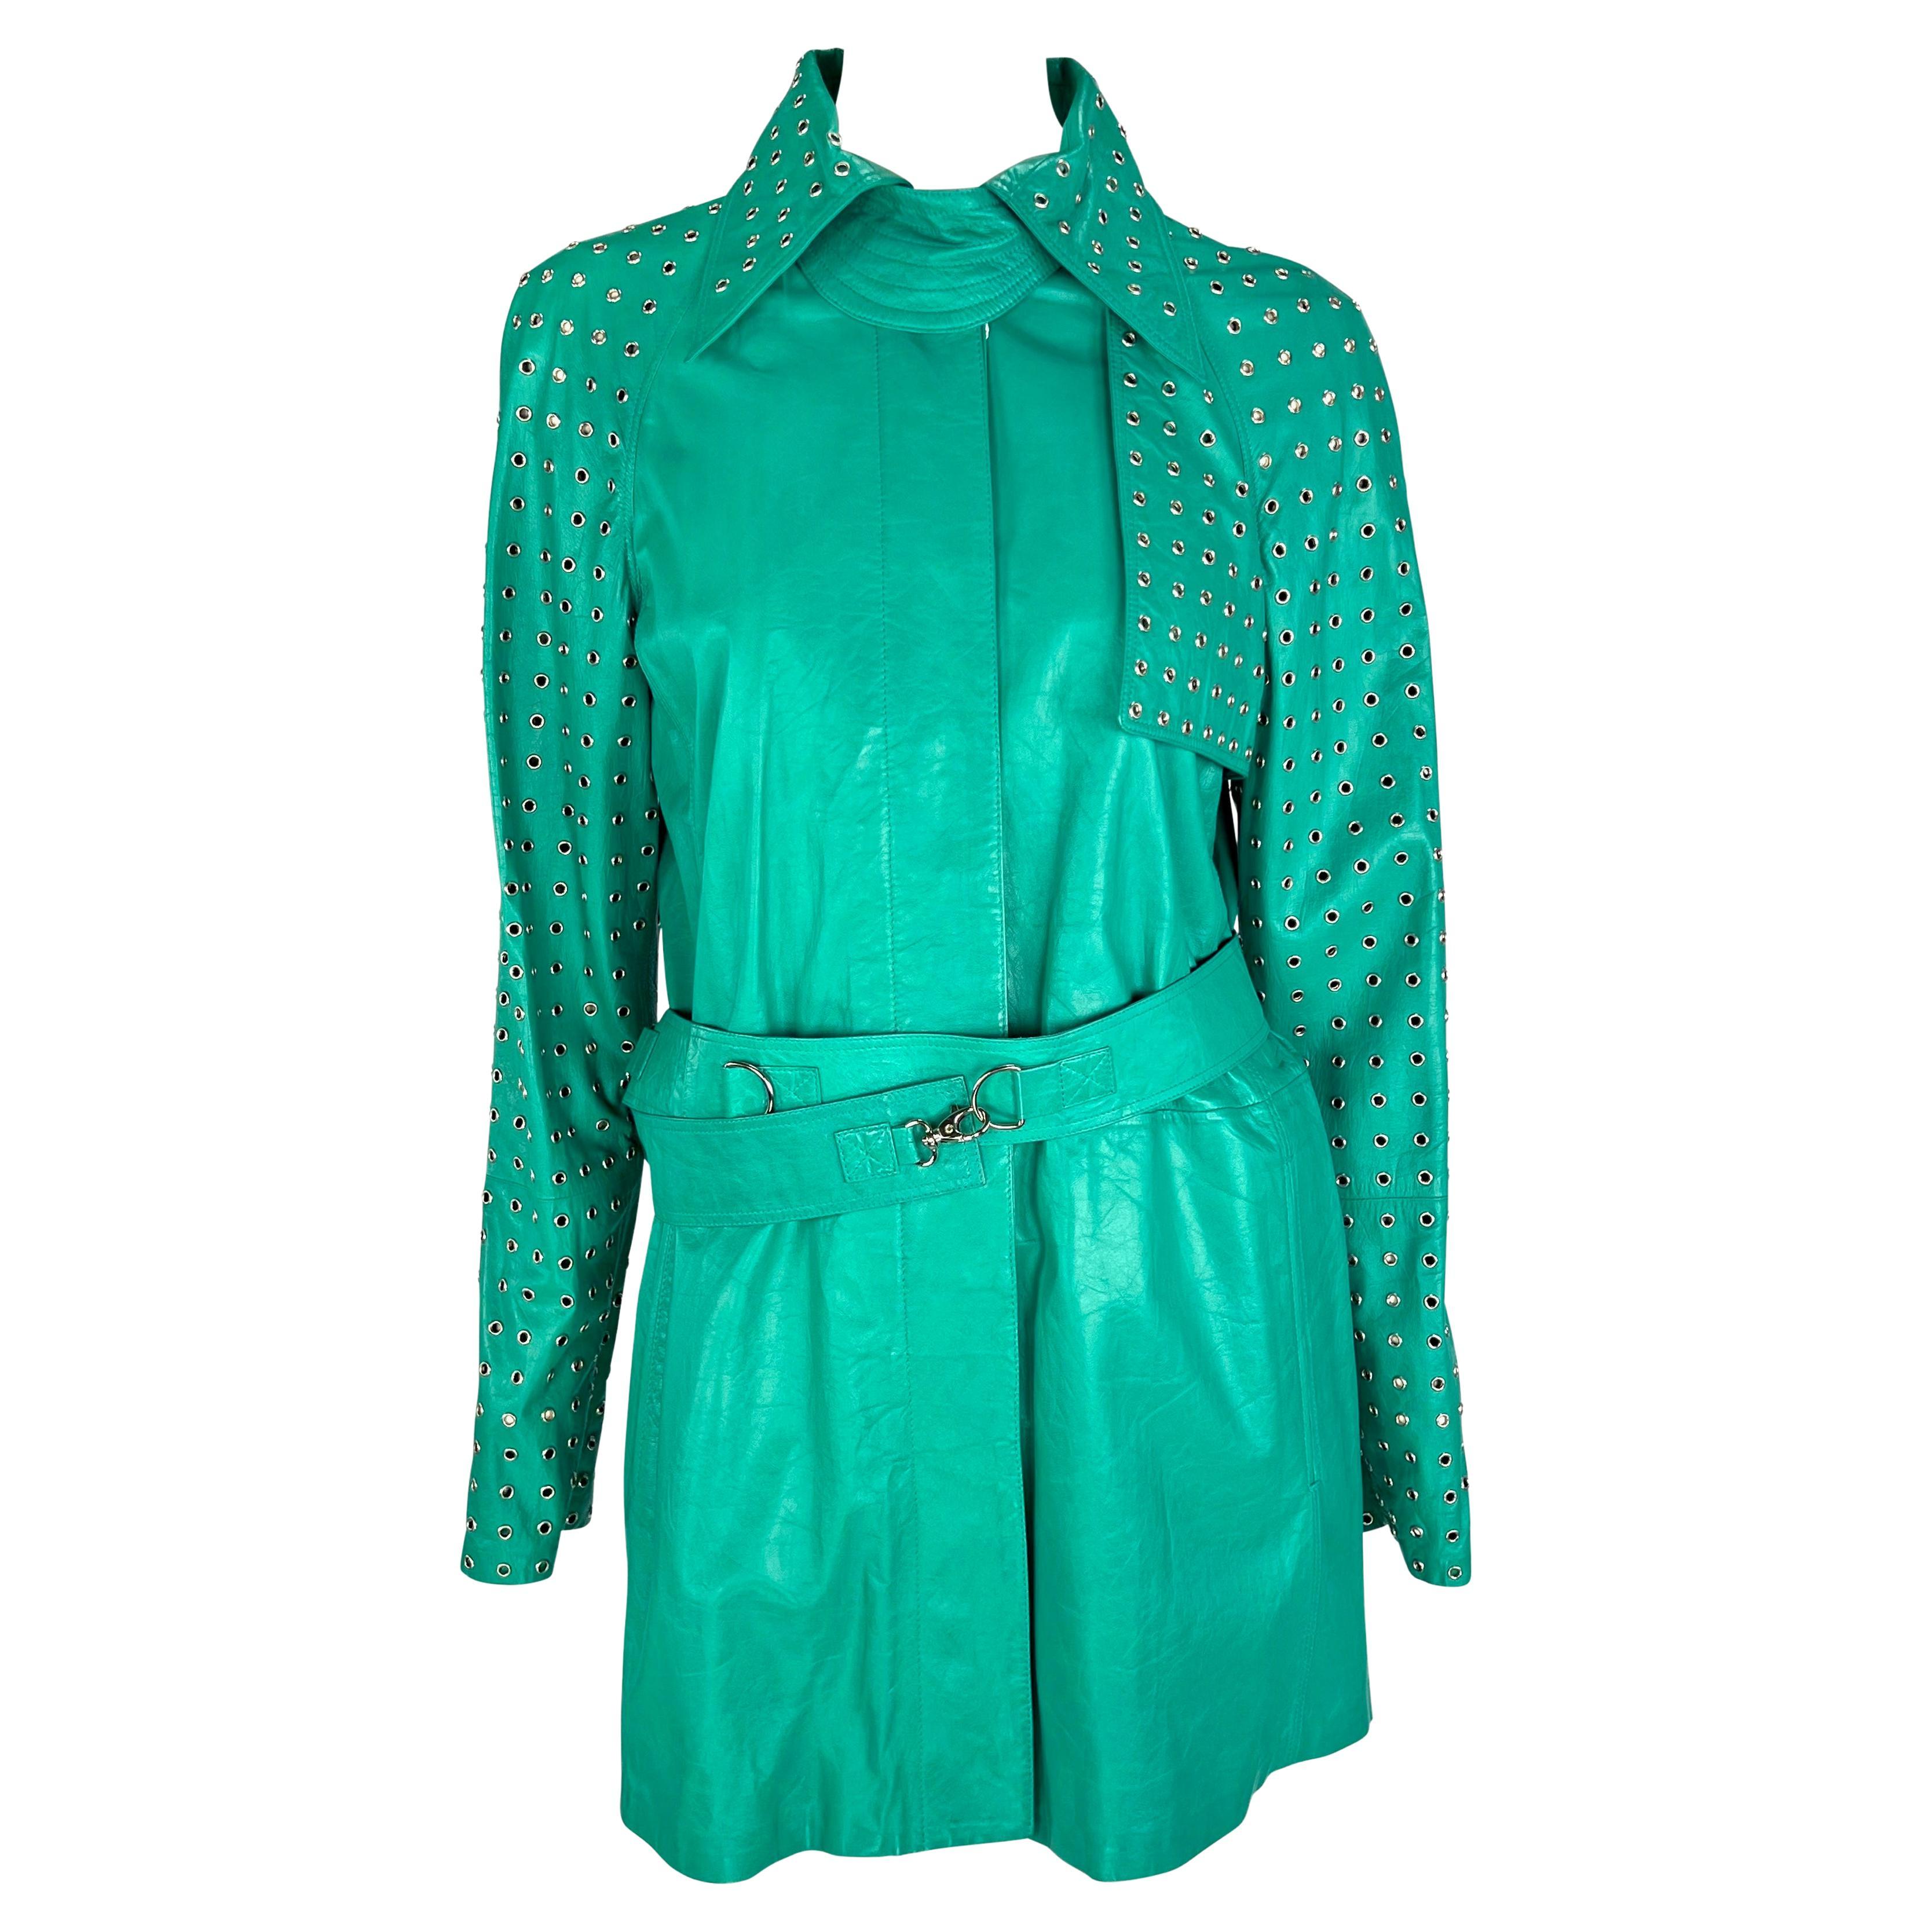 NWT S/S 2003 Gianni Versace by Donatella Versace Teal Rivet Leather Jacket For Sale